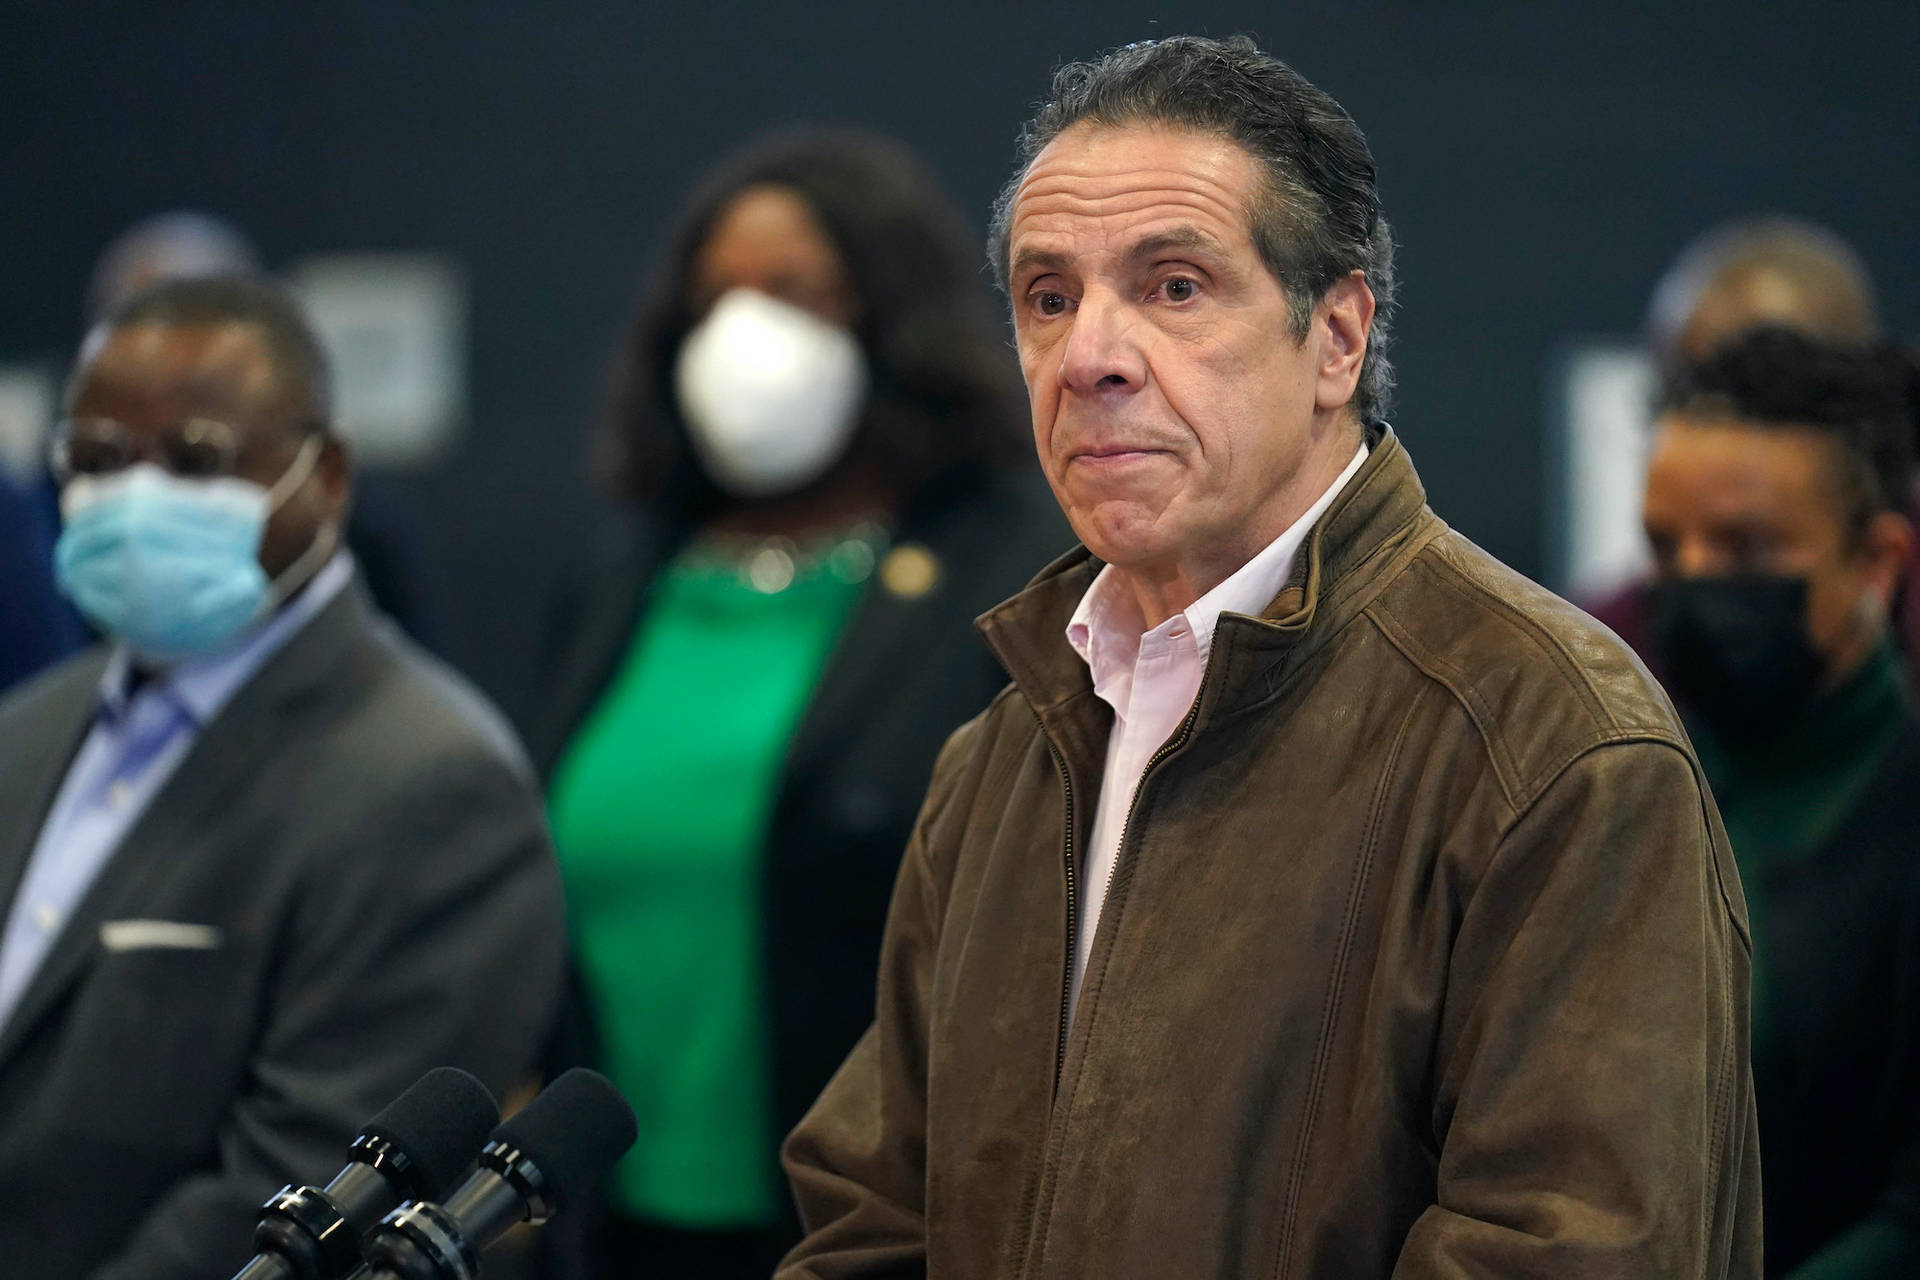 Unmasked Andrew Cuomo Wallpaper